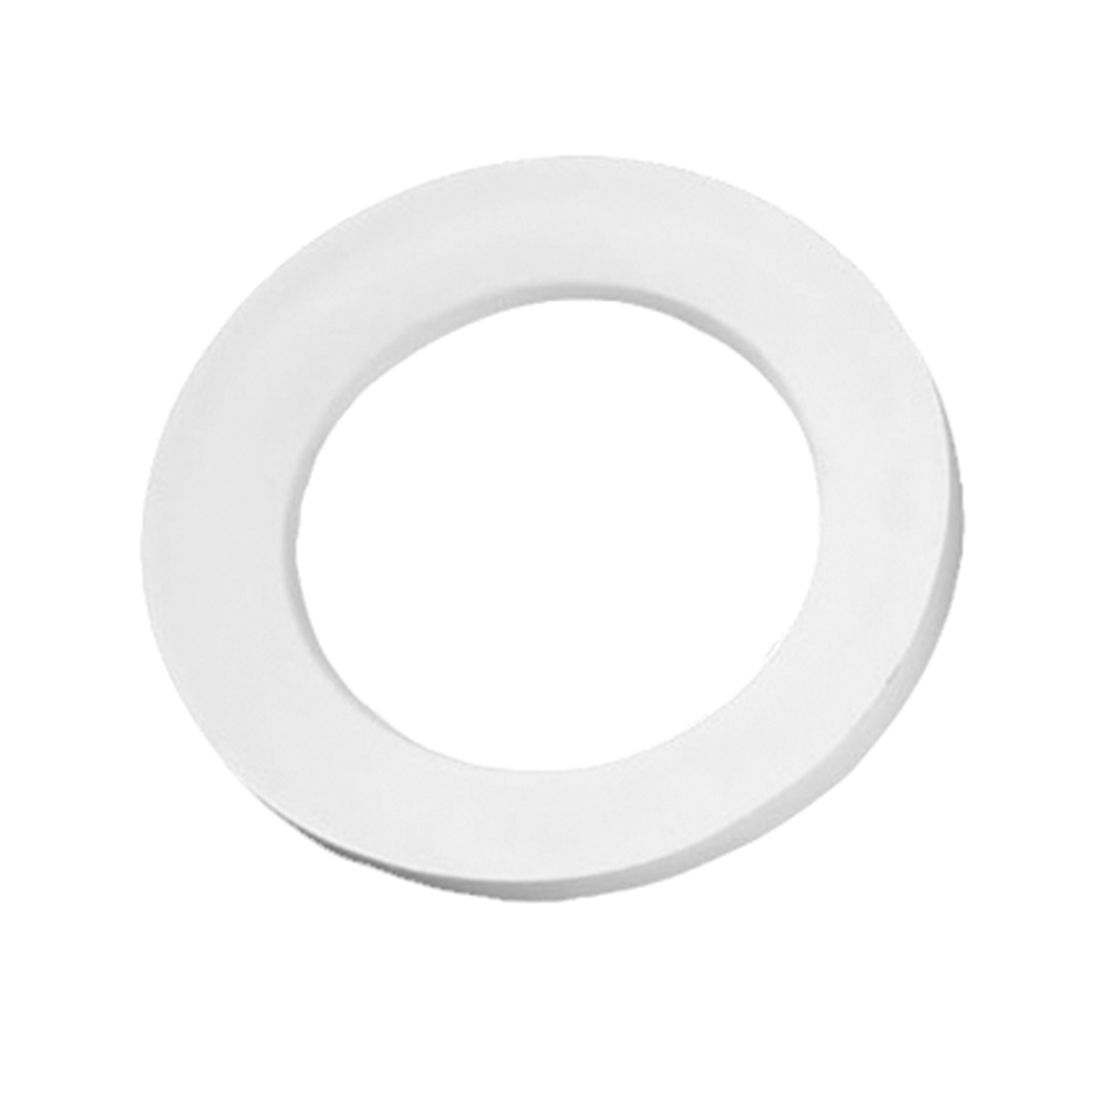 MINI ROUND DROP RING MOLD - 4.5" by CPI